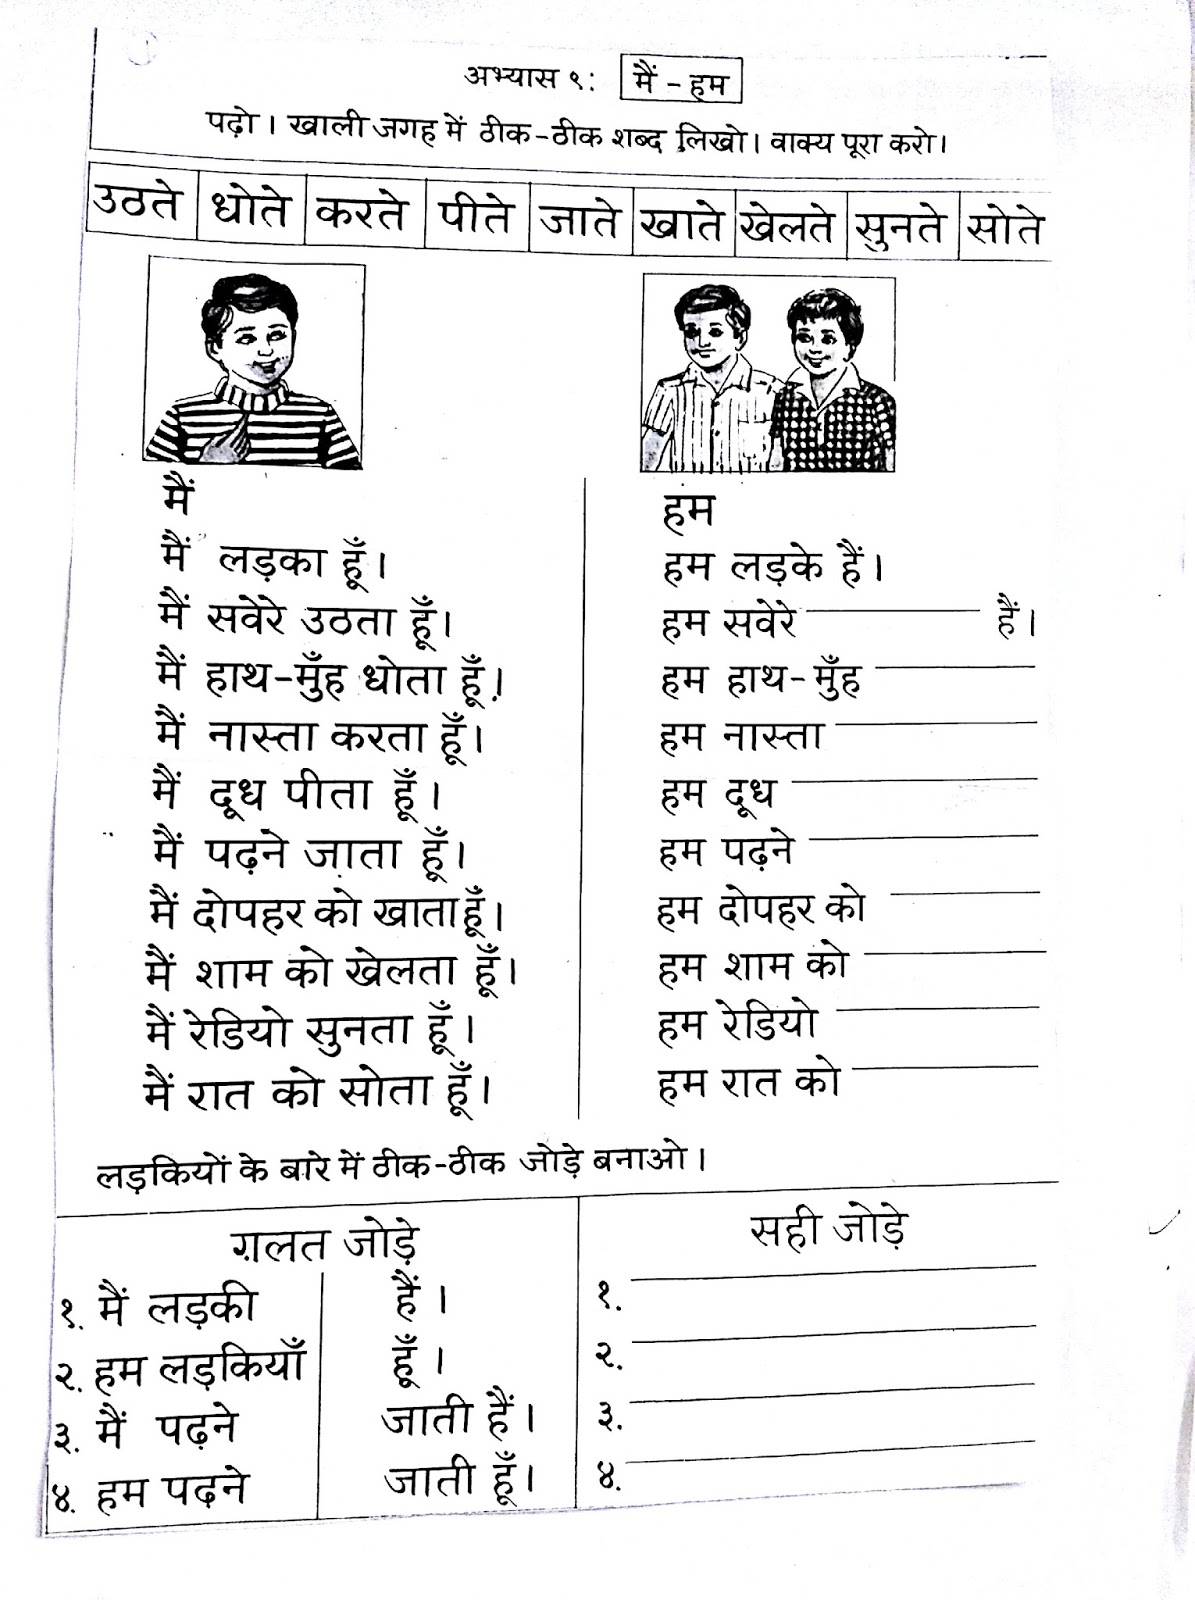 hindi-grammar-work-sheet-collection-for-classes-5-6-7-8-pronoun-work-sheets-for-3-4-5-6